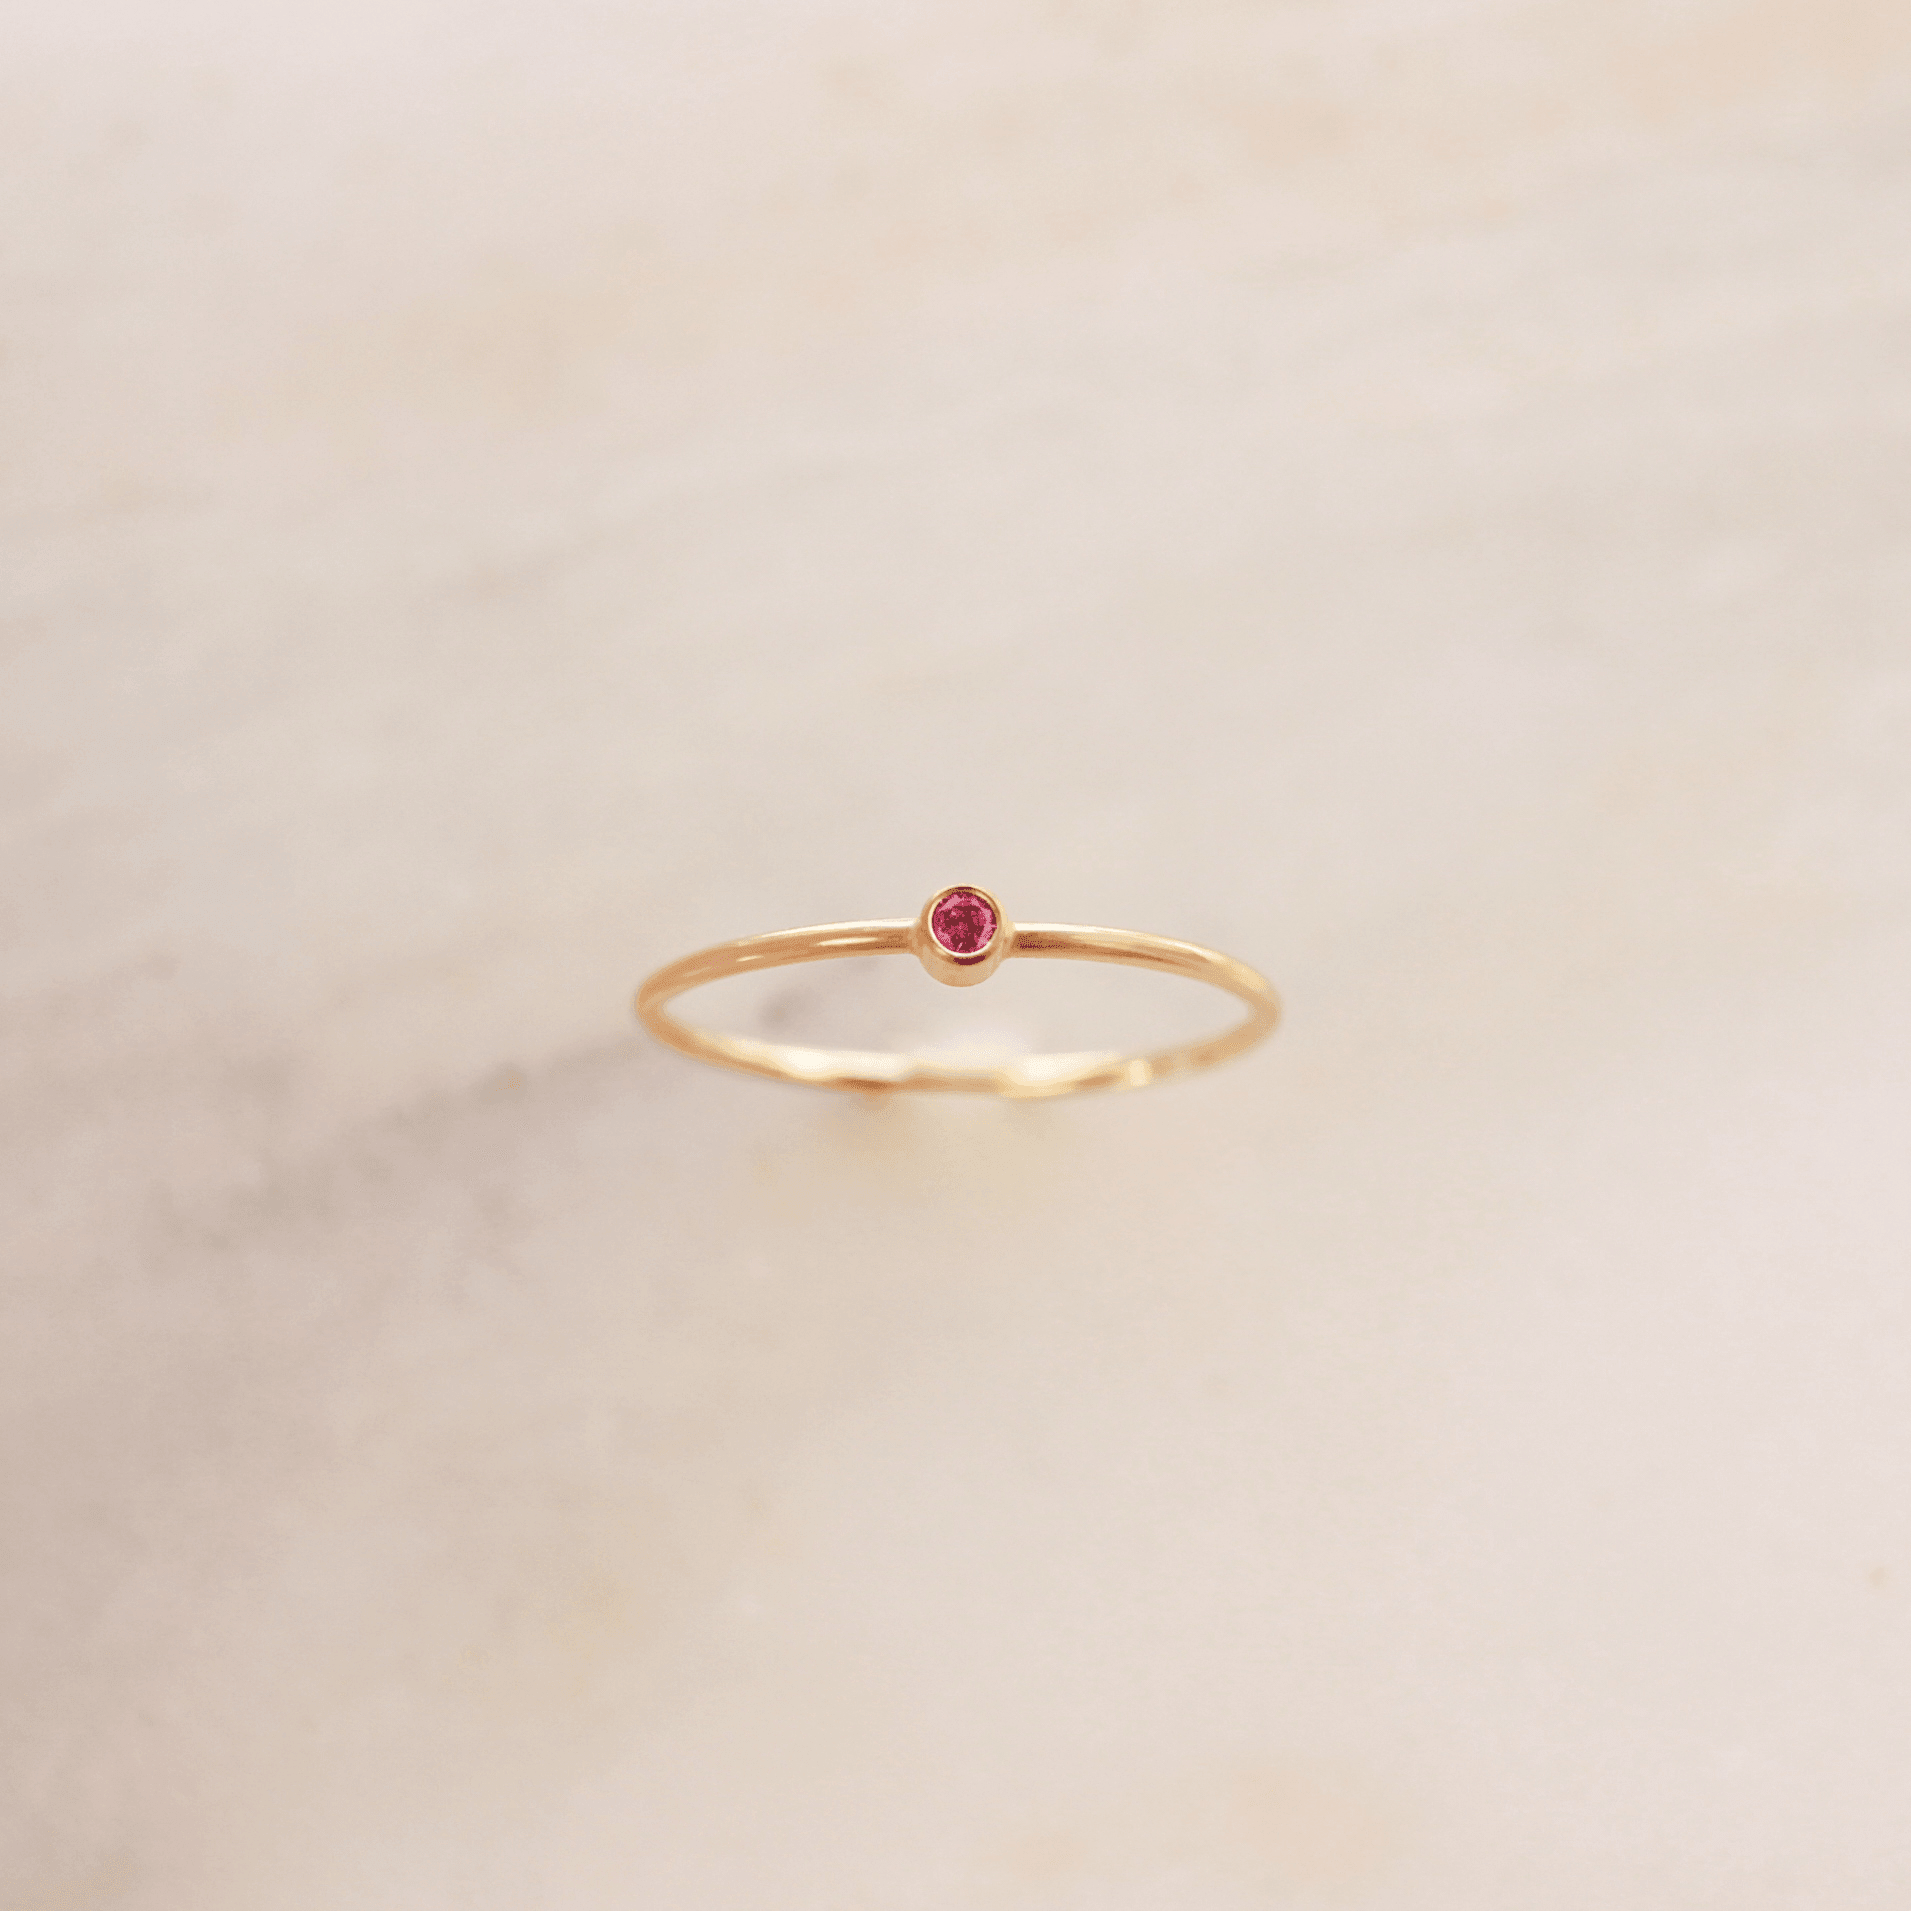 Tiny July Birthstone Ring ∙ Ruby - Nolia Jewelry - Meaningful + Sustainably Handcrafted Jewelry